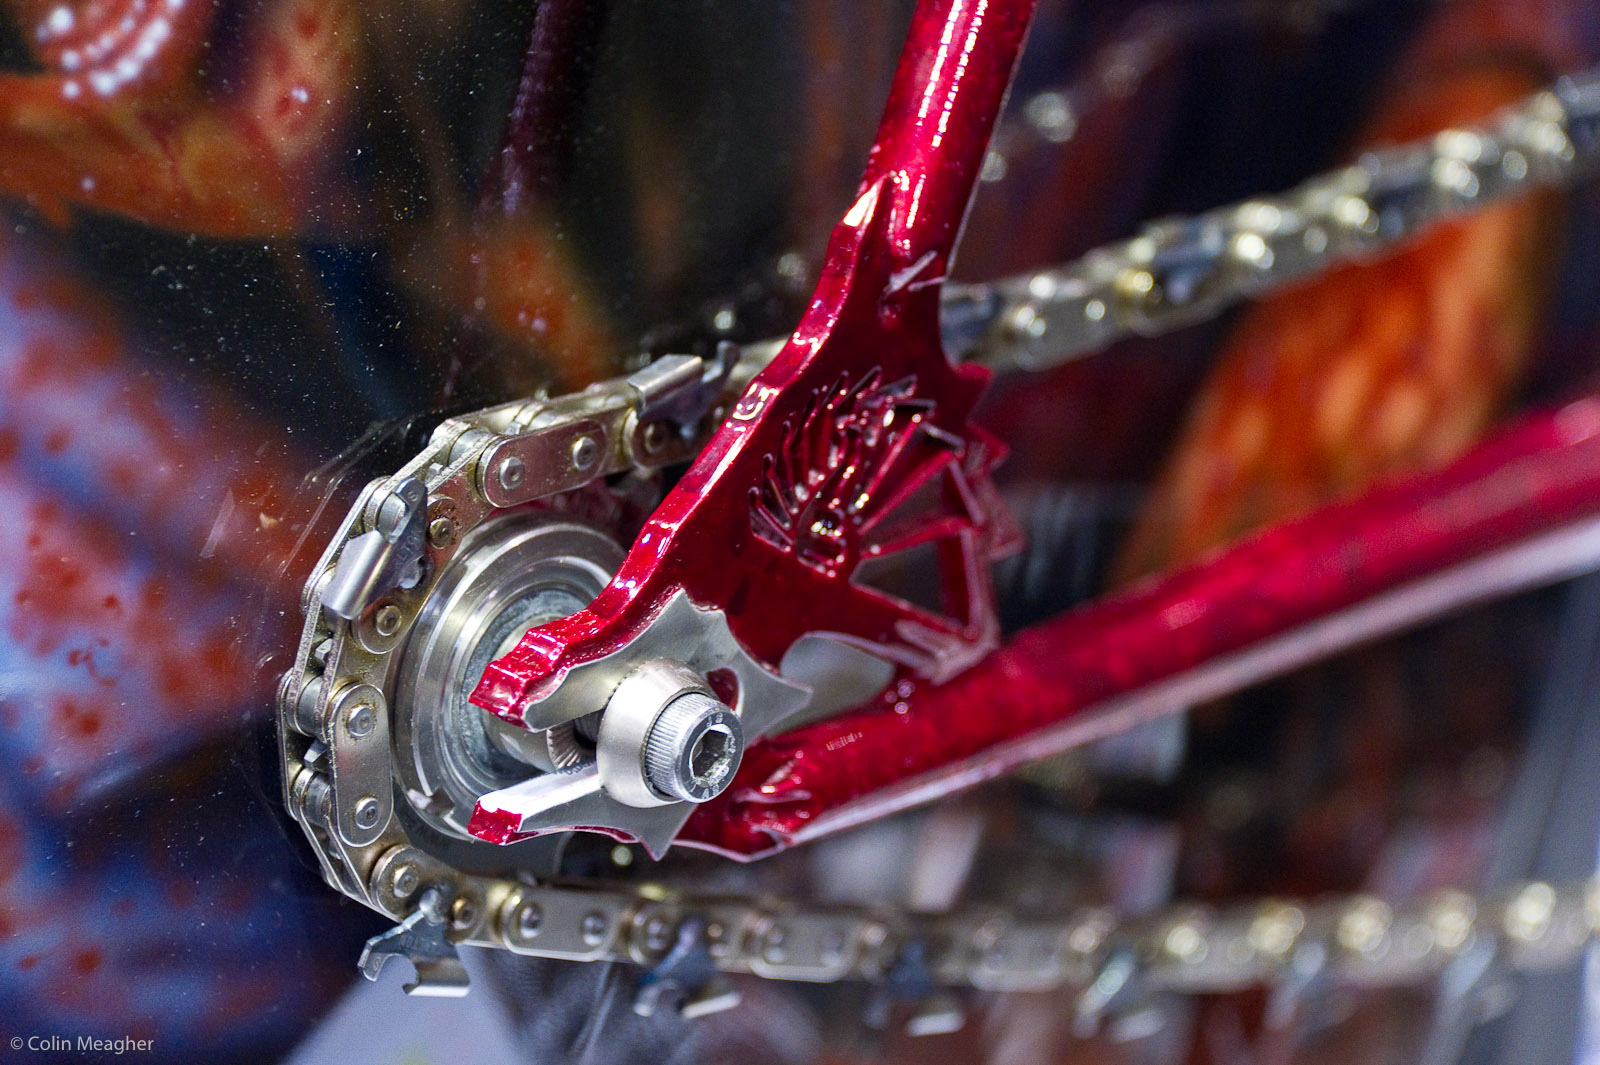 Details included blood splatters and a "chainsaw" chain for a bike chain.